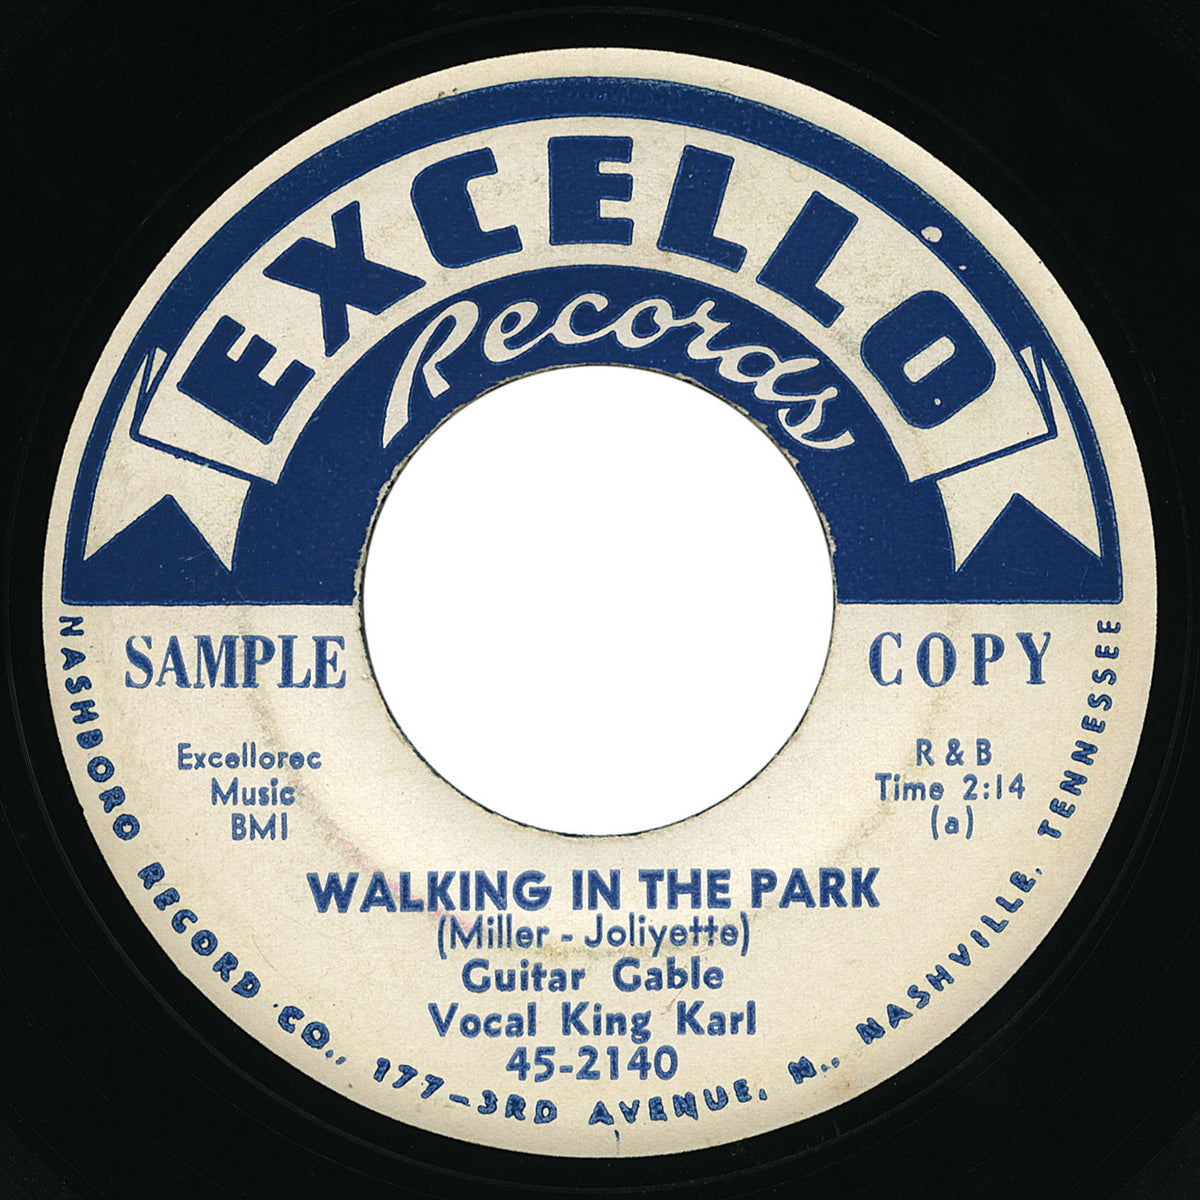 Guitar Gable vocal King Karl – Walking In The Park – Excello